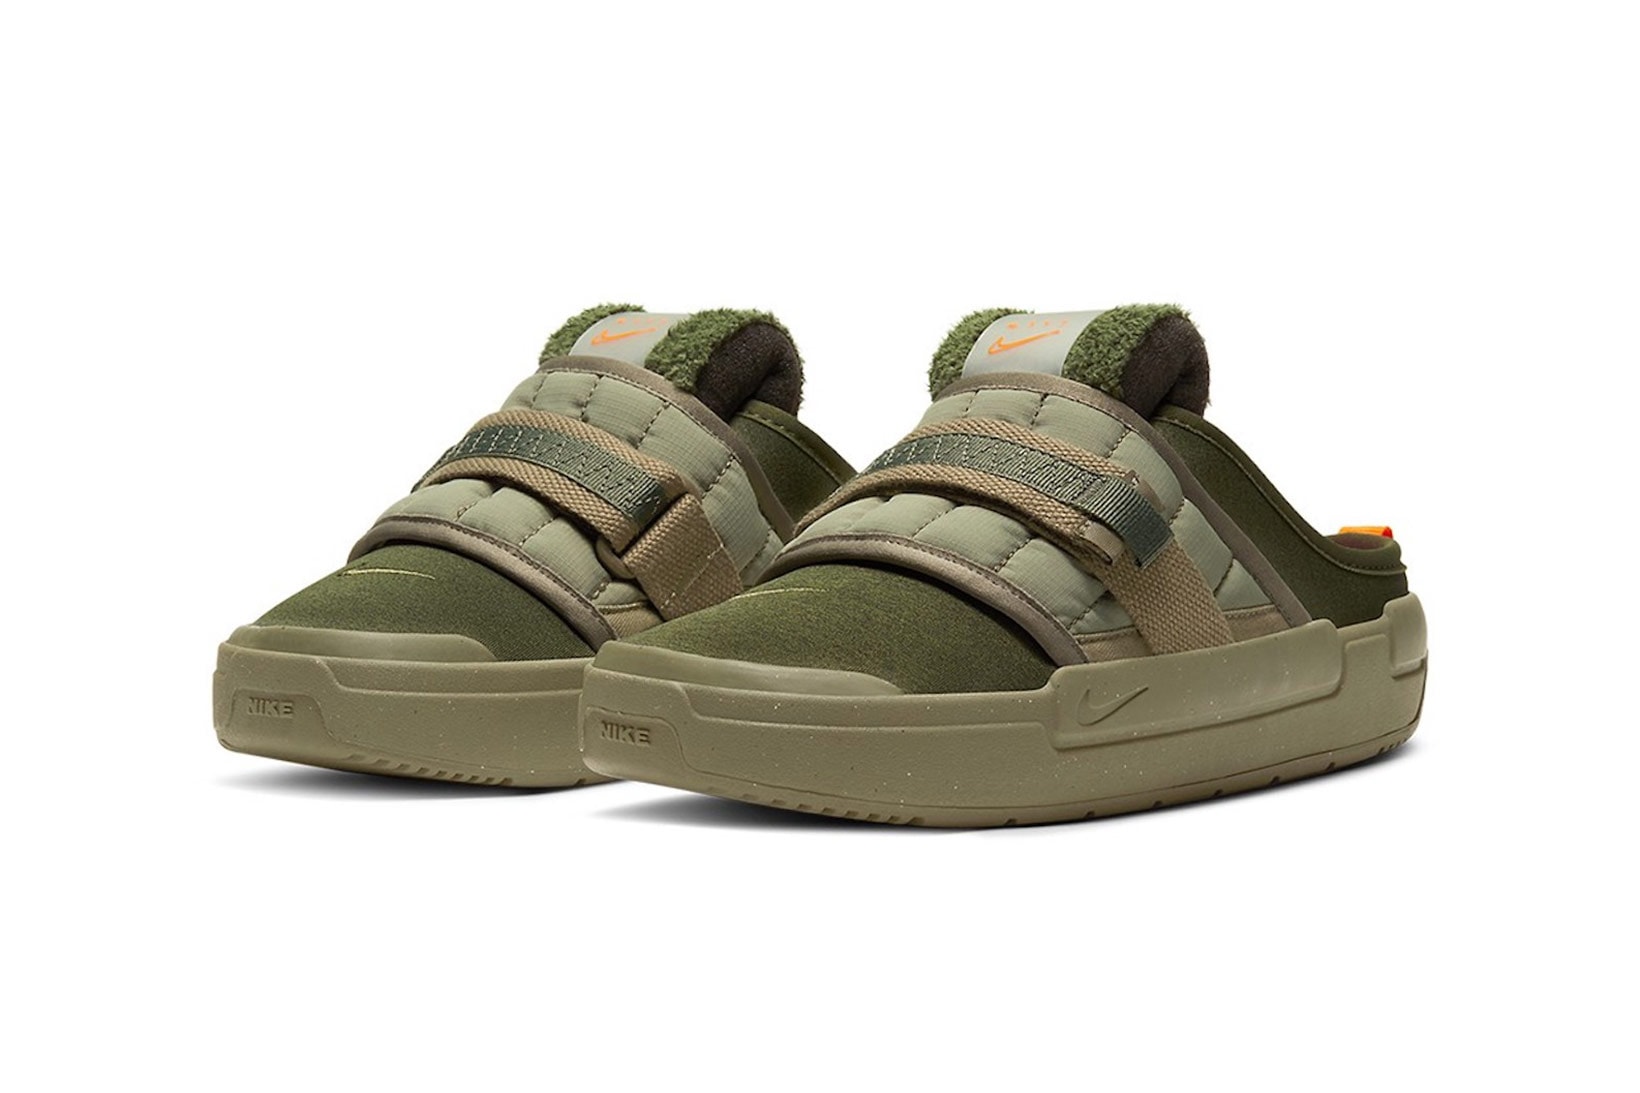 nike offline mules sandals slippers army olive green orange colorway footwear lateral front view